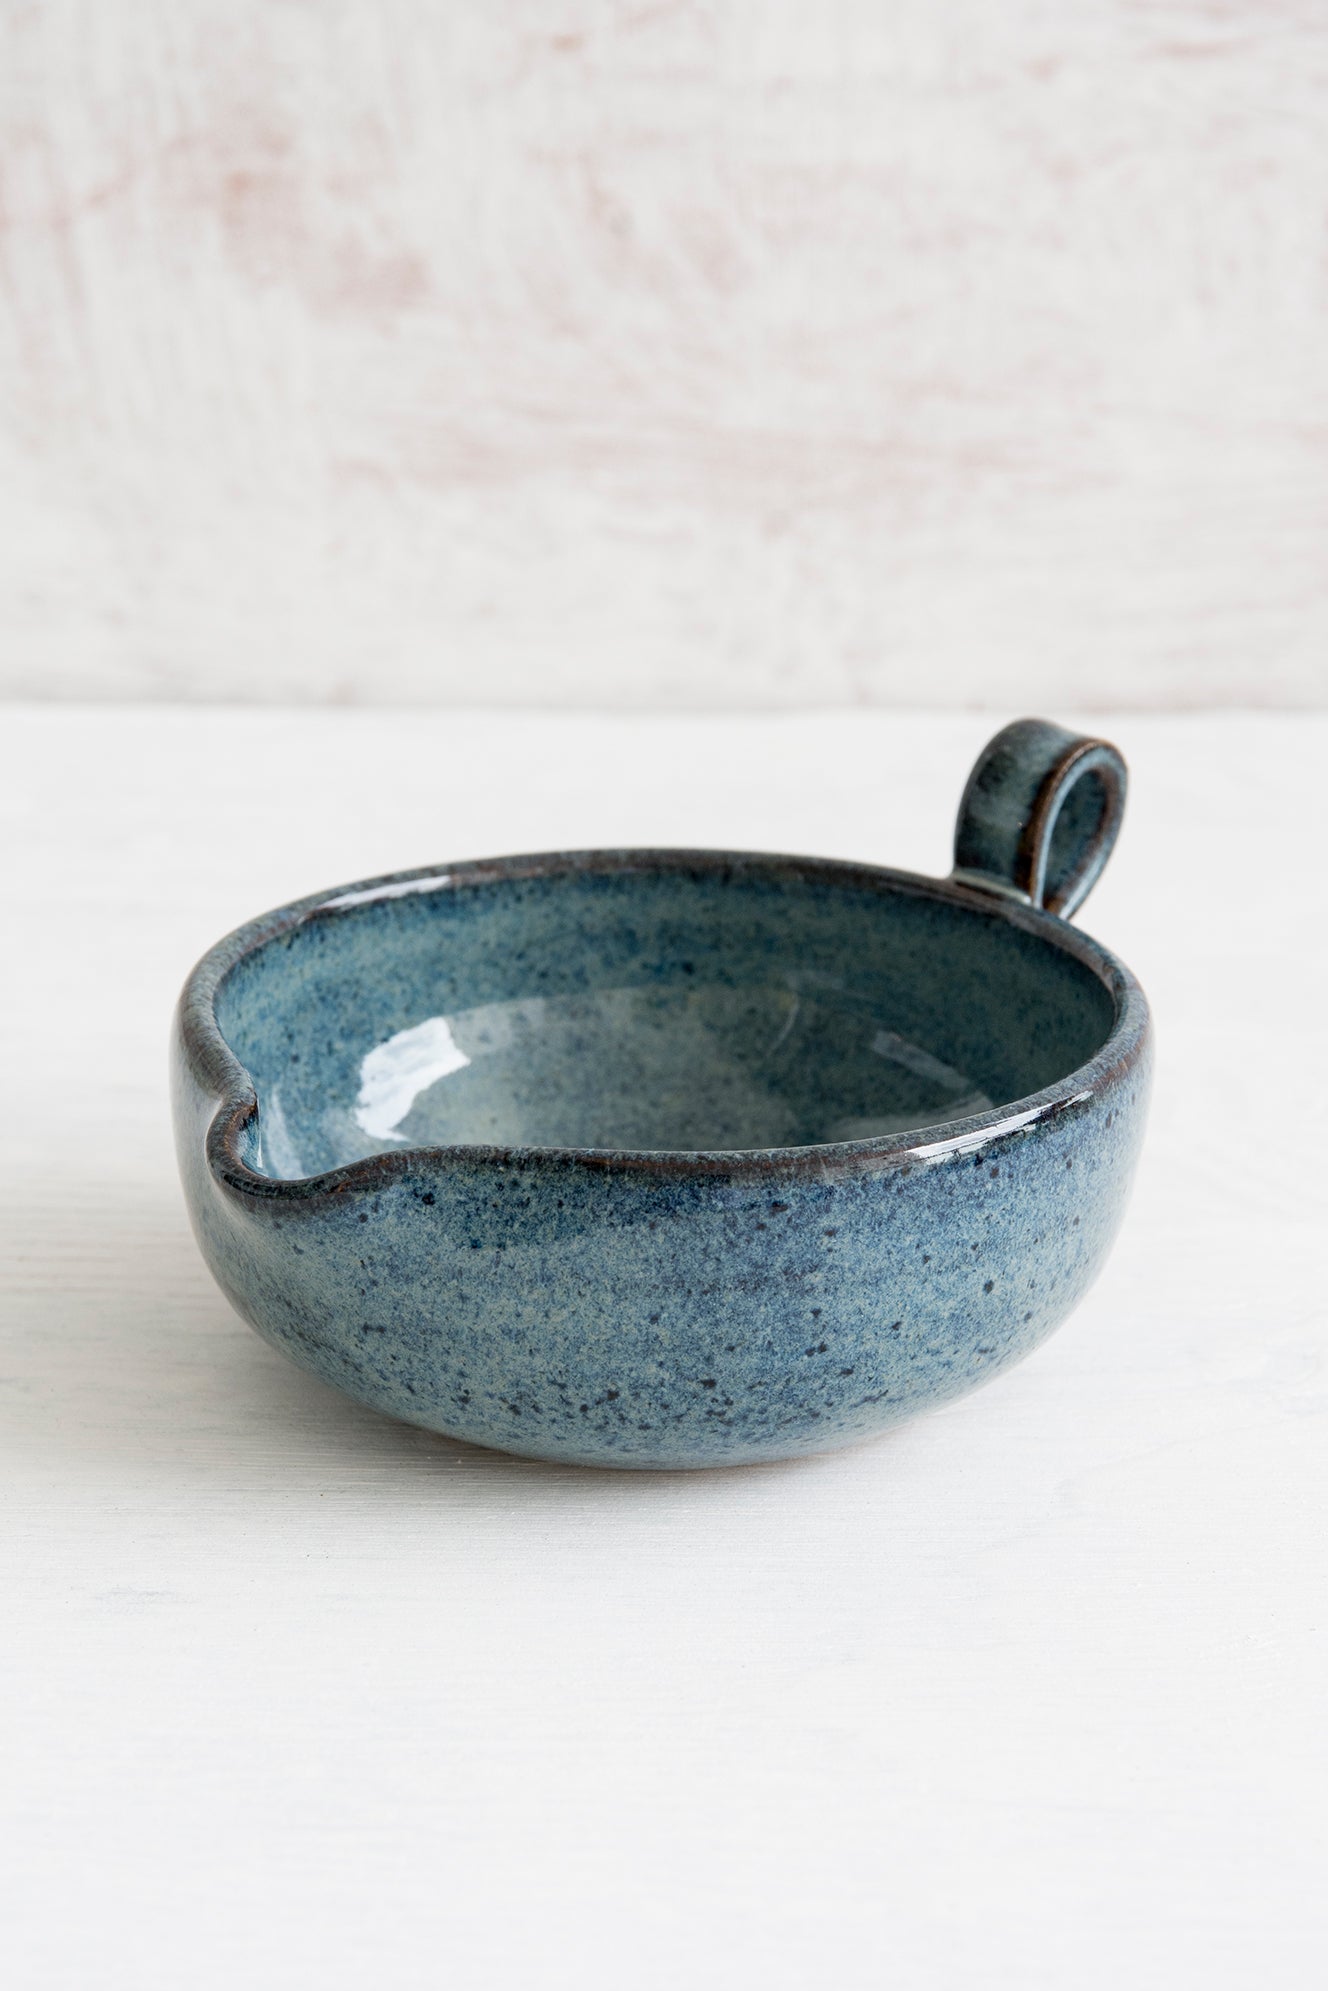 Pottery Tea Bag Holder - Mad About Pottery- Bowl